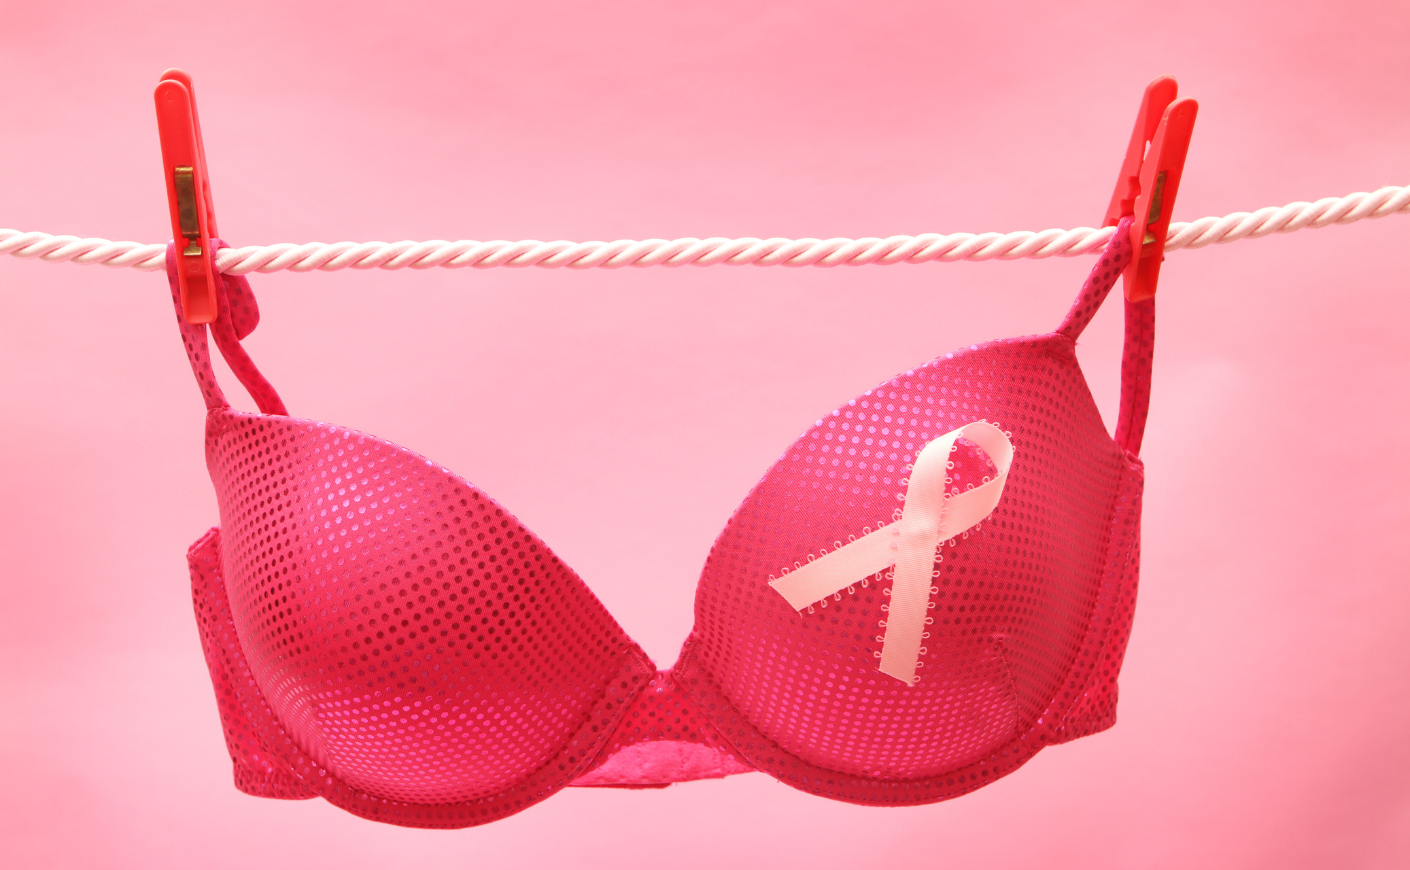 A pink bra with a breast cancer awareness ribbon